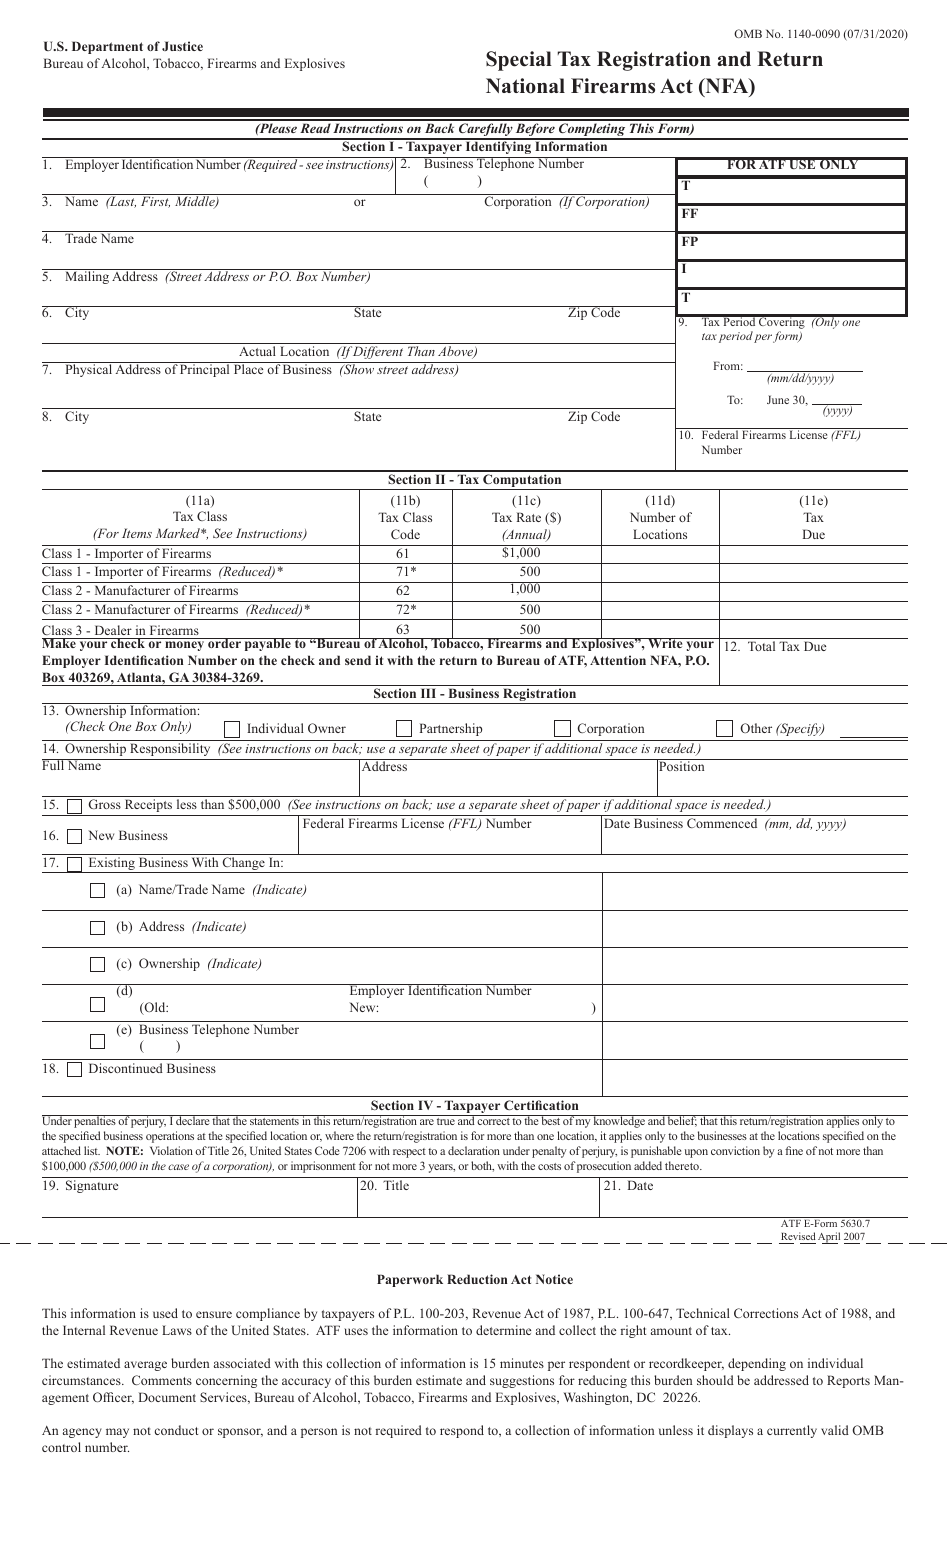 atf-form-5630-7-download-fillable-pdf-or-fill-online-special-tax